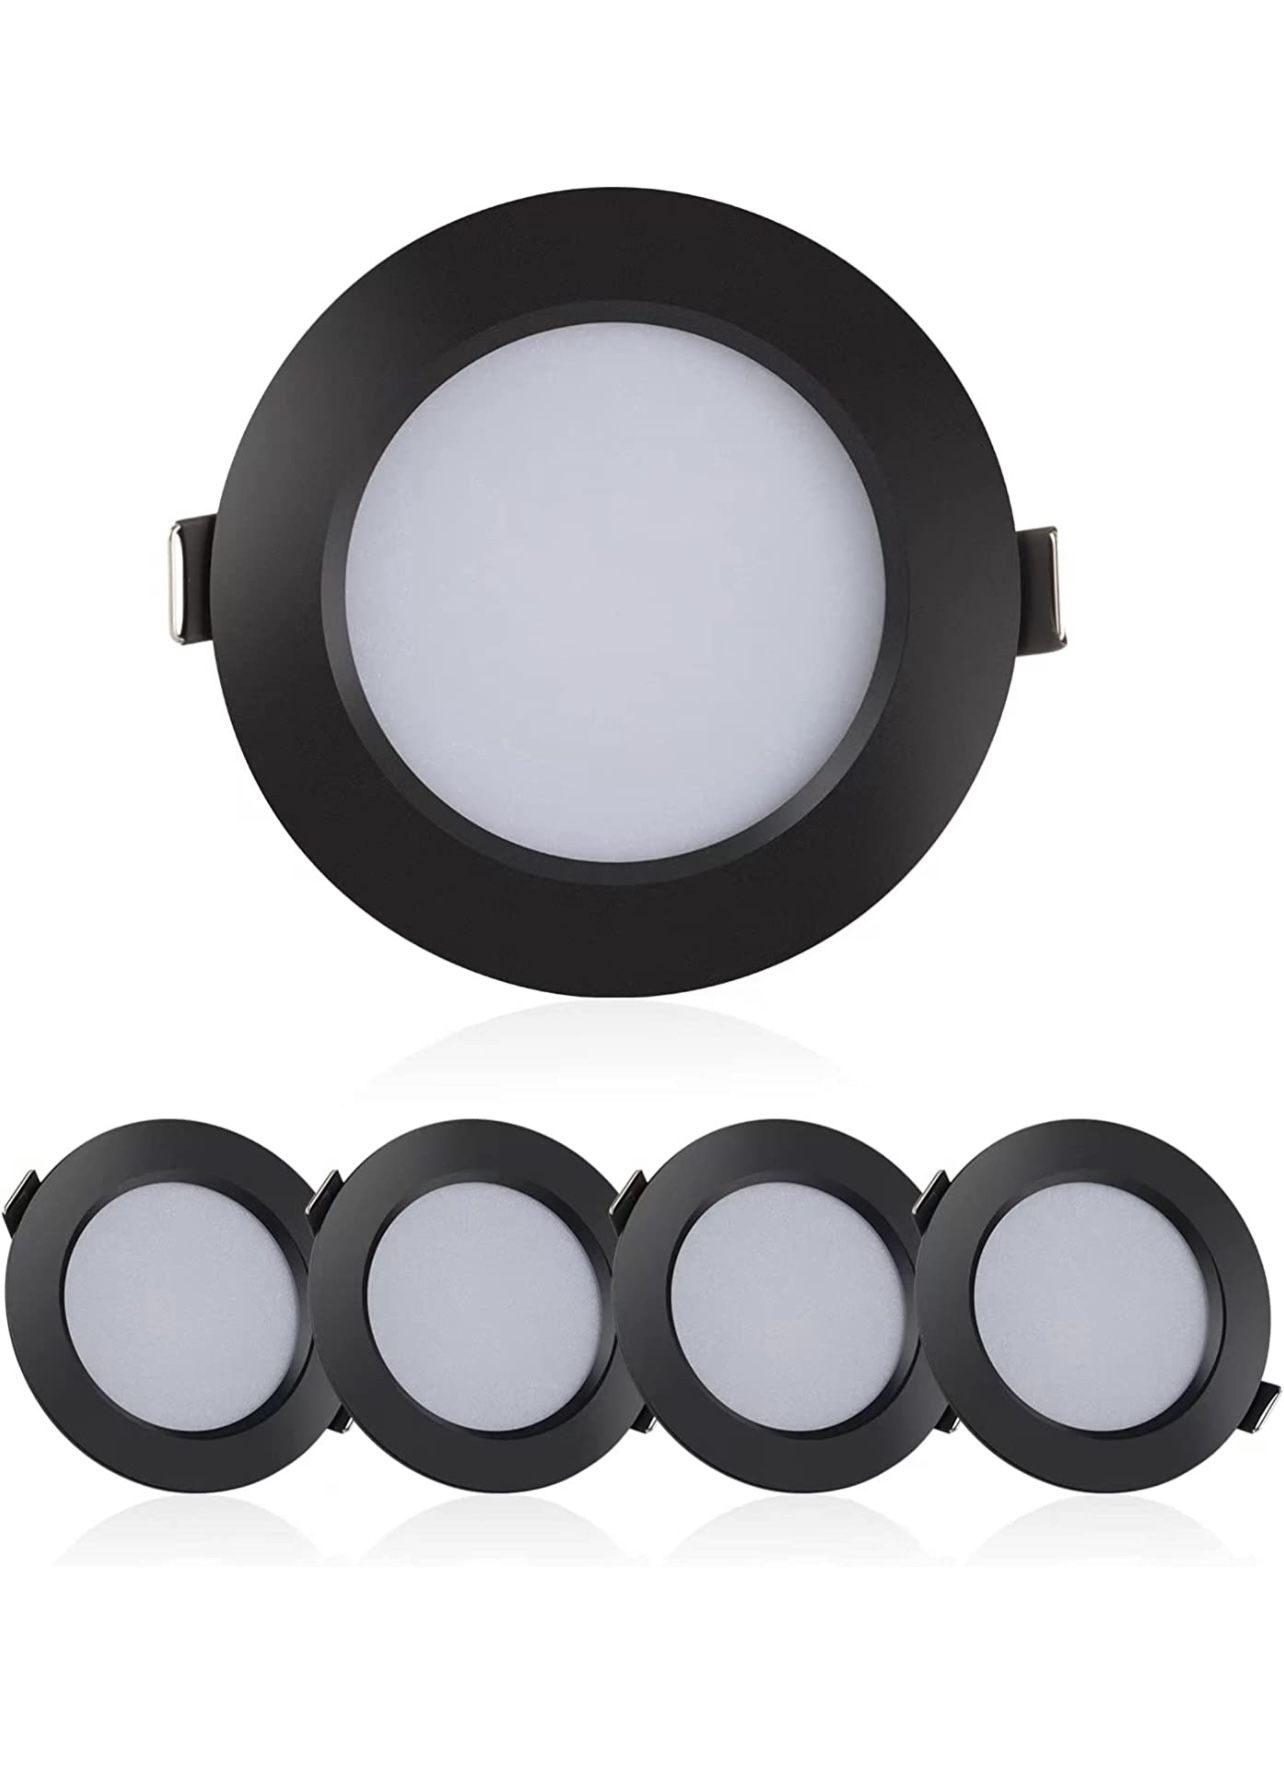 RV Boat Recessed Ceiling Light,4 Pack